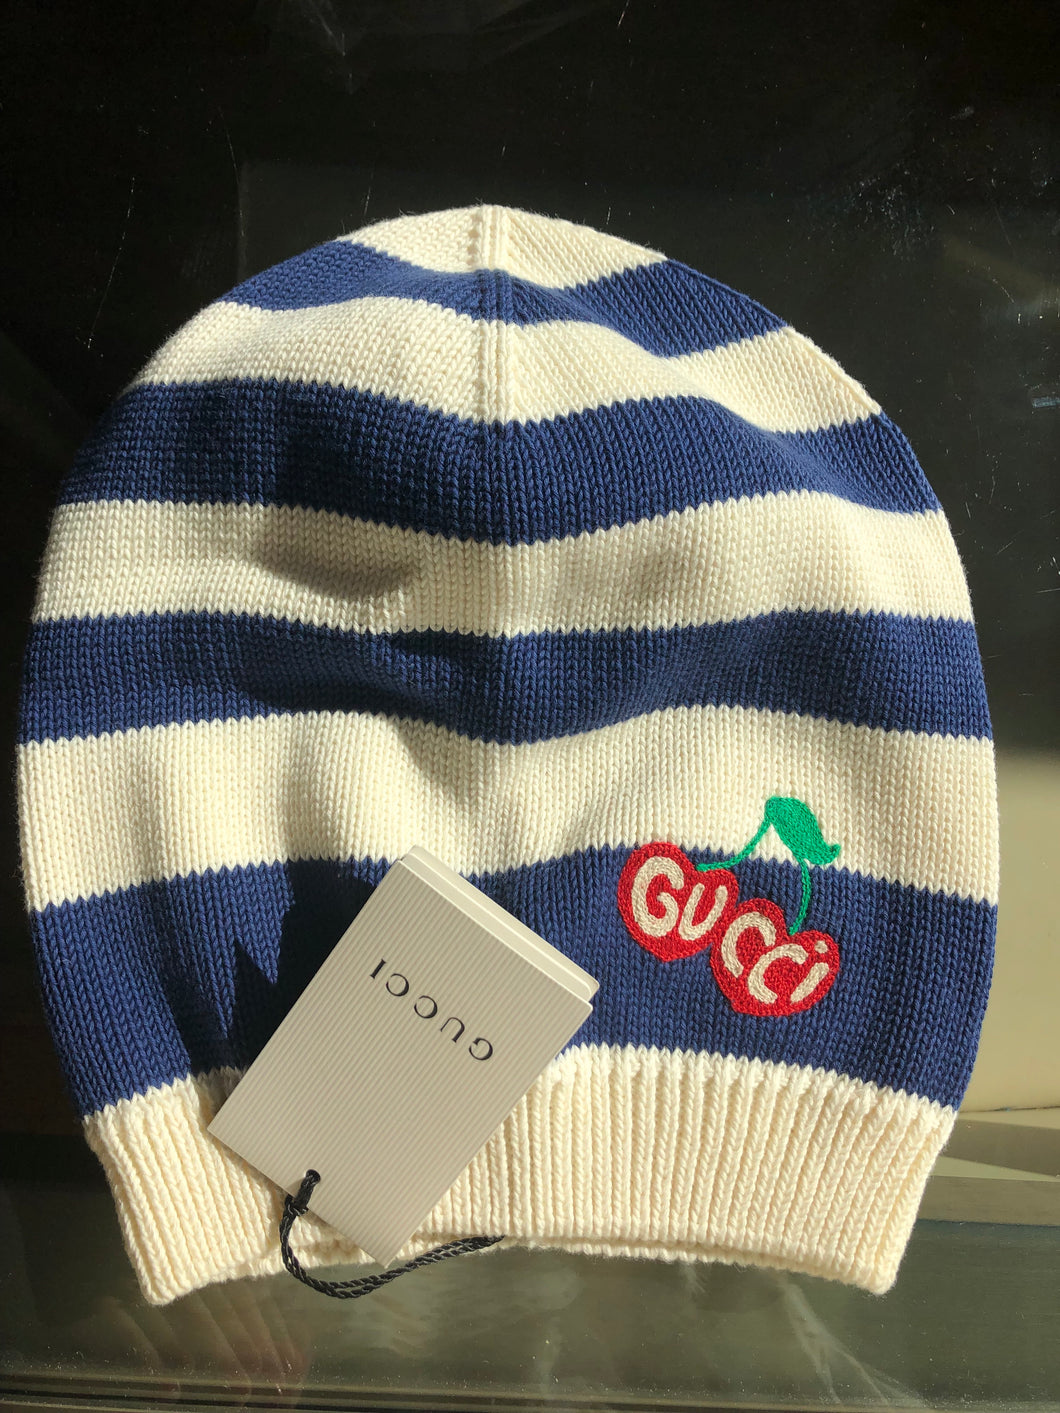 Gucci Blue and White Striped Beanie Hat with Cherry Motif